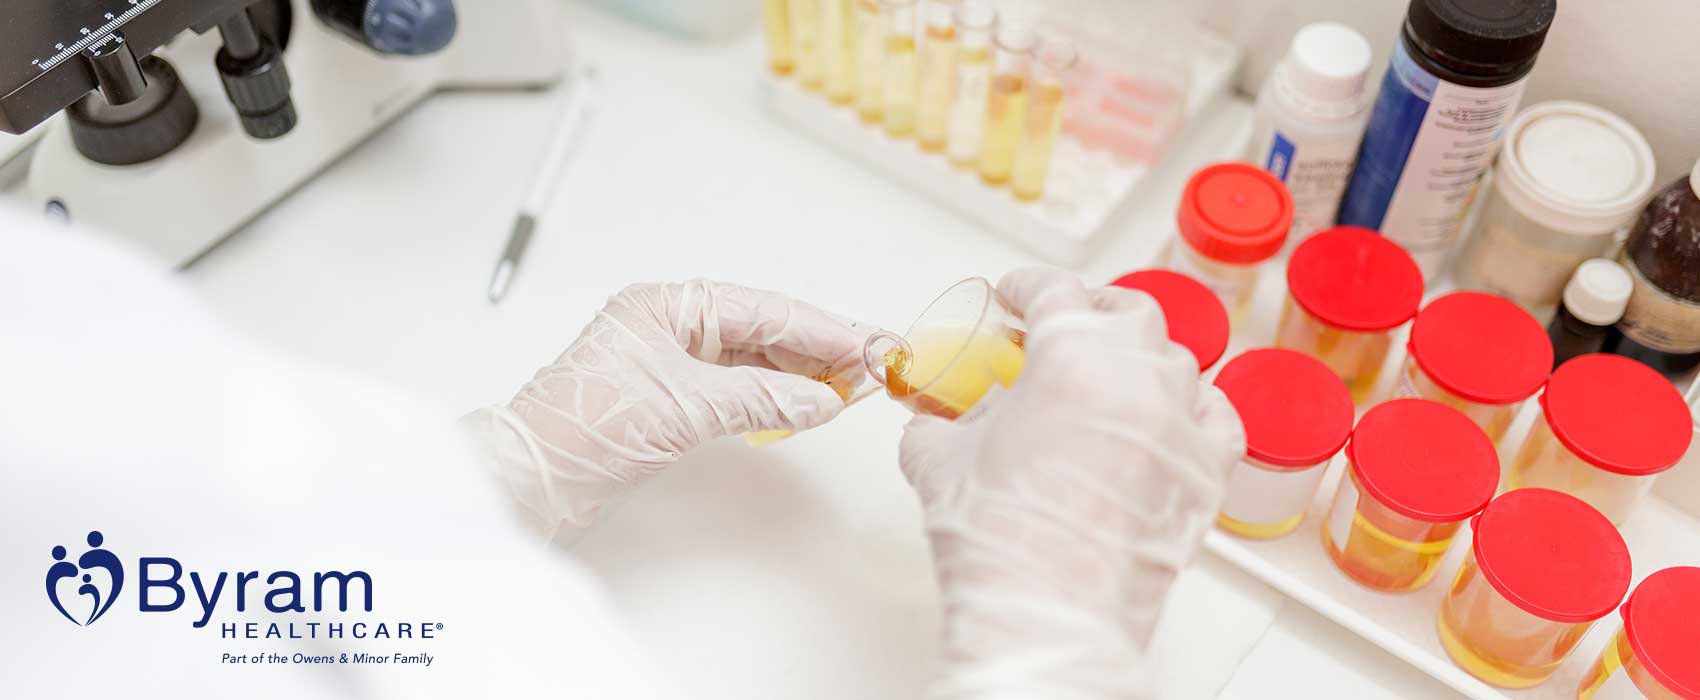 Person handling urine sample in a lab.